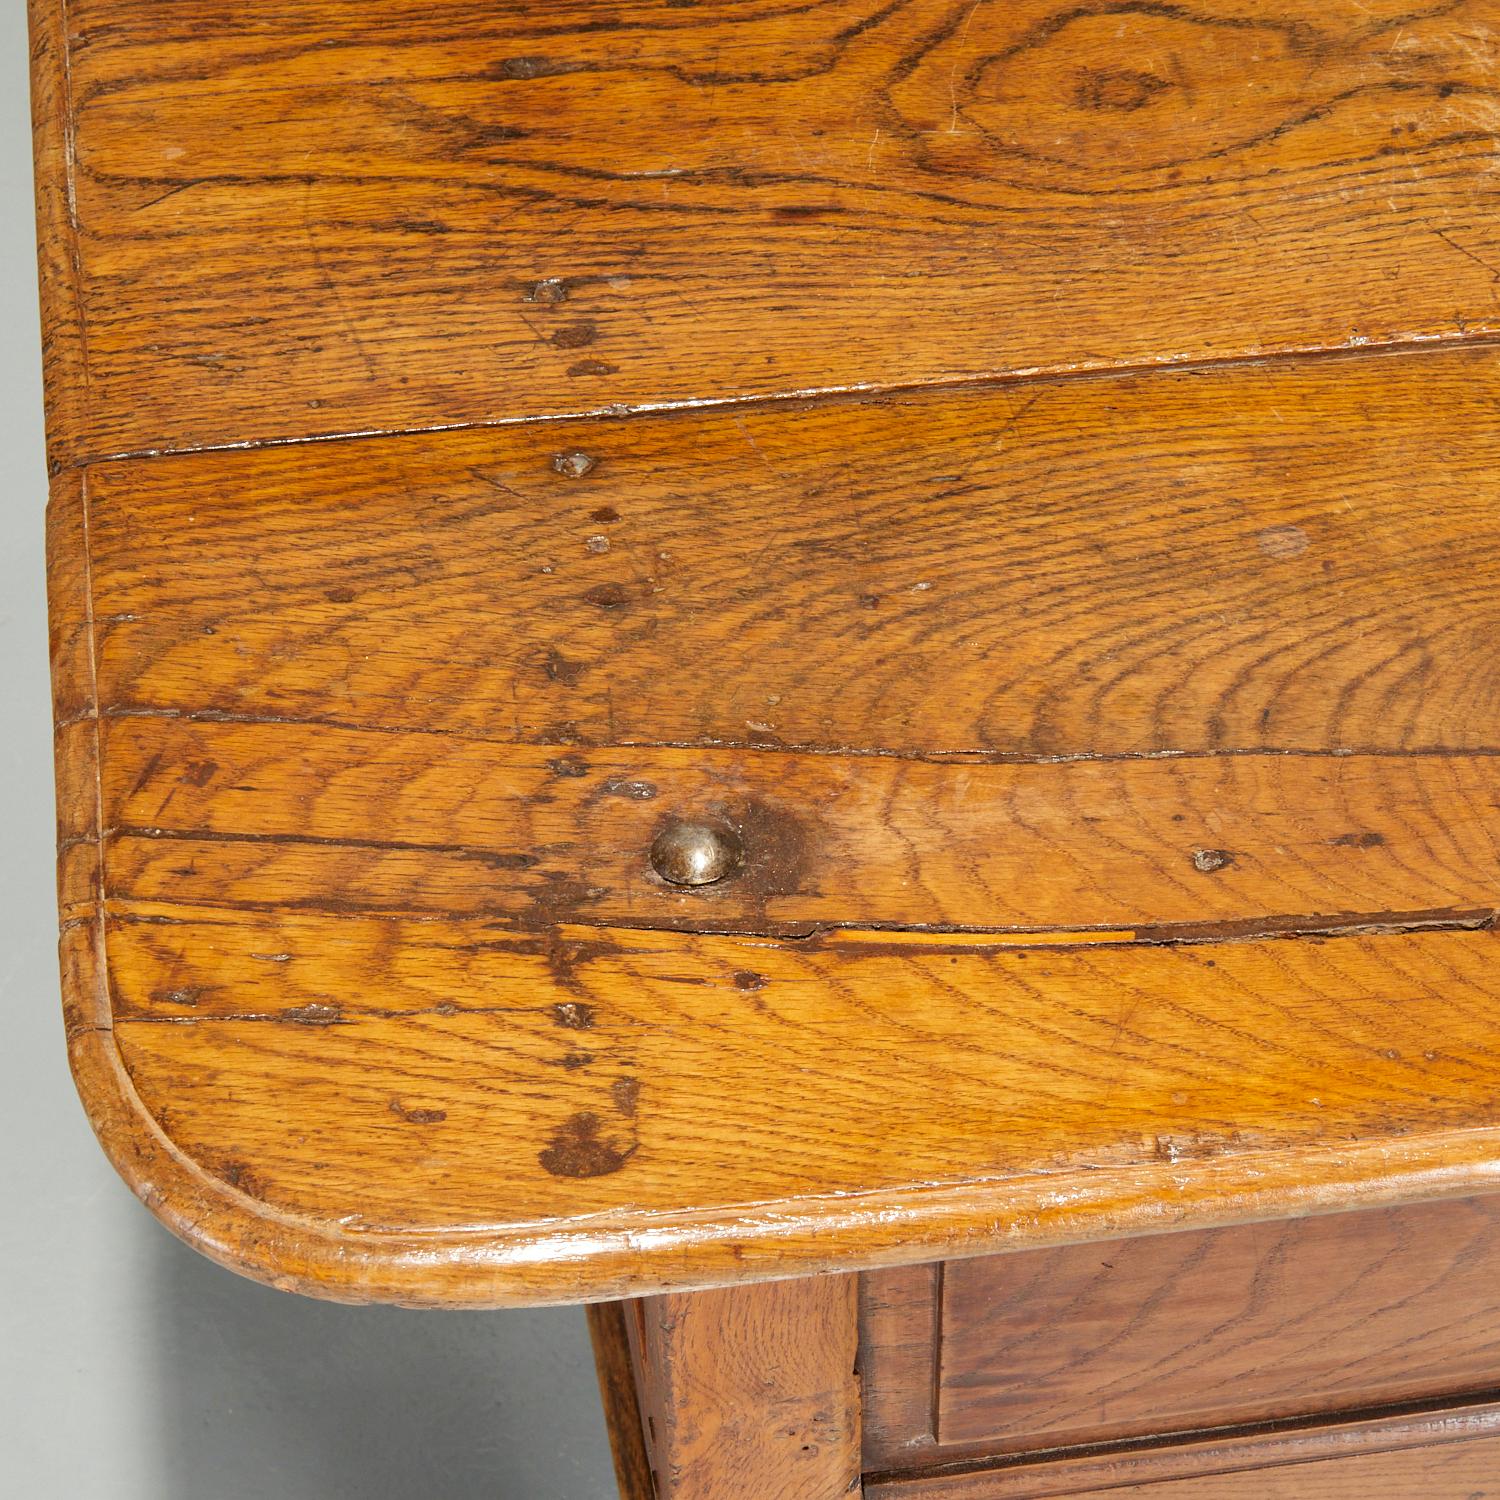 18th Century 18th C. Continental Baroque Carved Oak Table with Storage and Iron Hardware For Sale